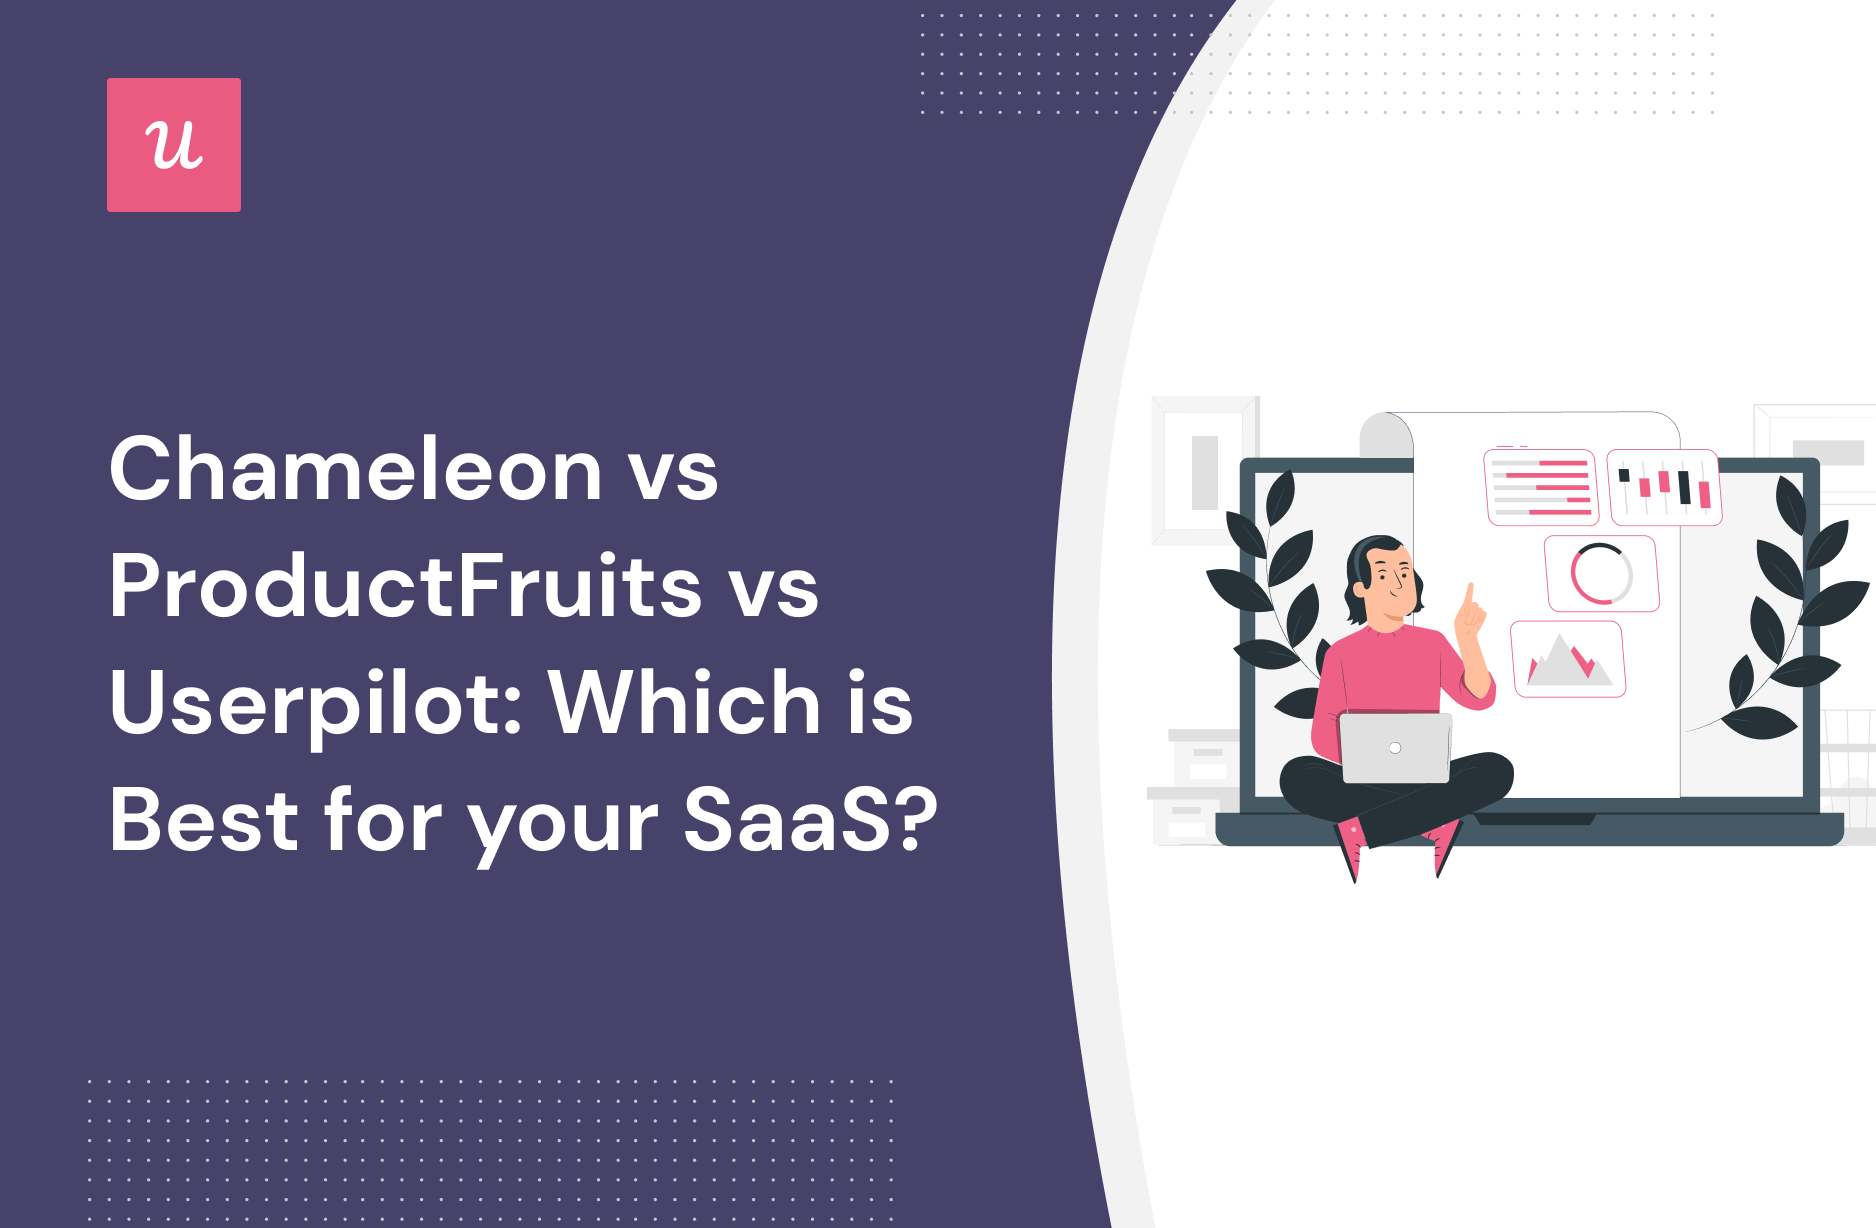 Chameleon vs ProductFruits vs Userpilot: Which is Best for your SaaS?